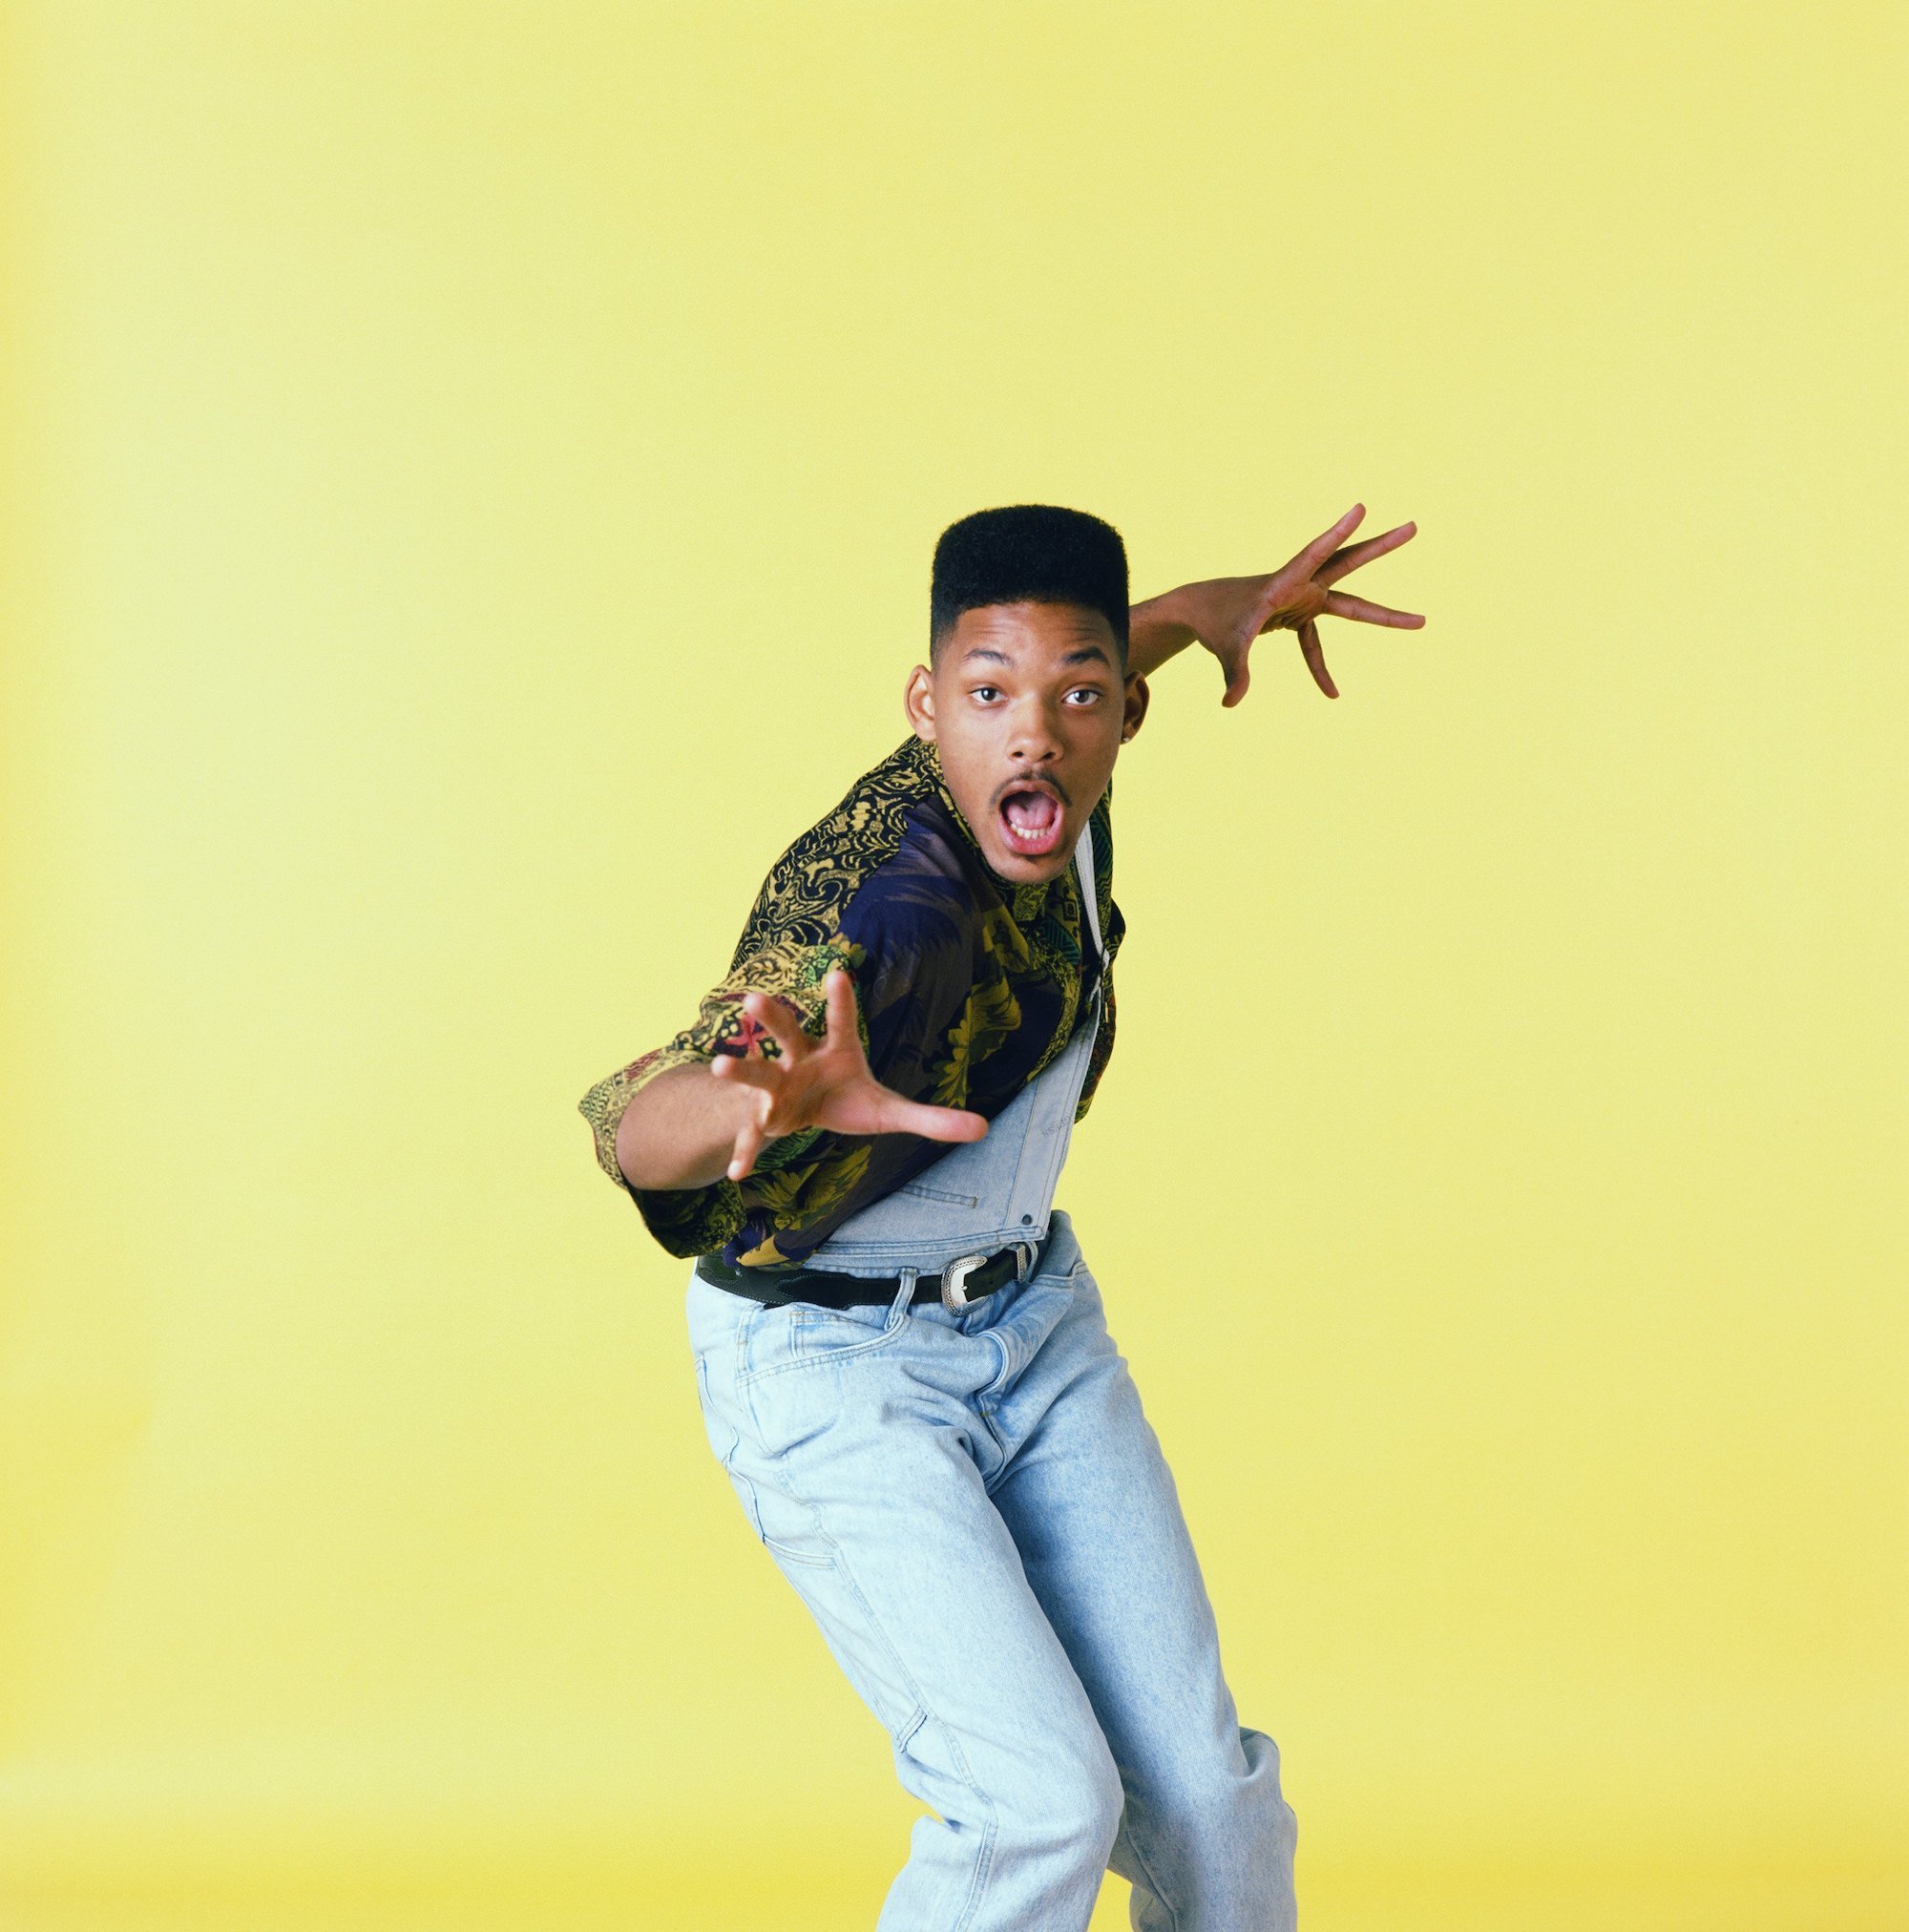 'Fresh Prince of Bel-Air' star Will Smith poses against a yellow background